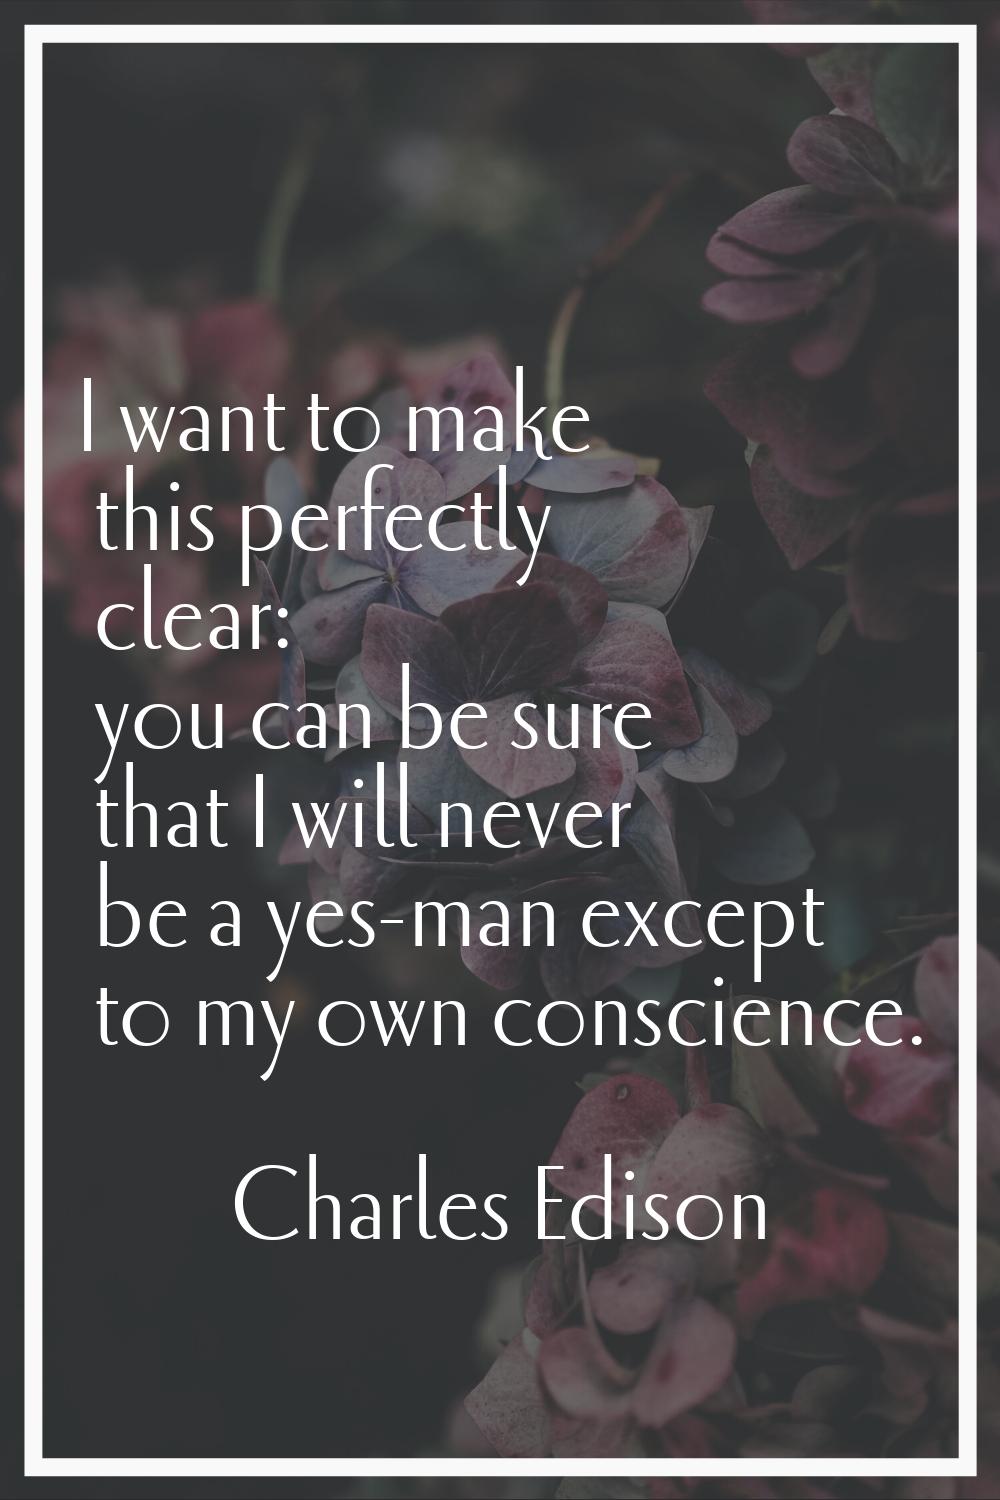 I want to make this perfectly clear: you can be sure that I will never be a yes-man except to my ow